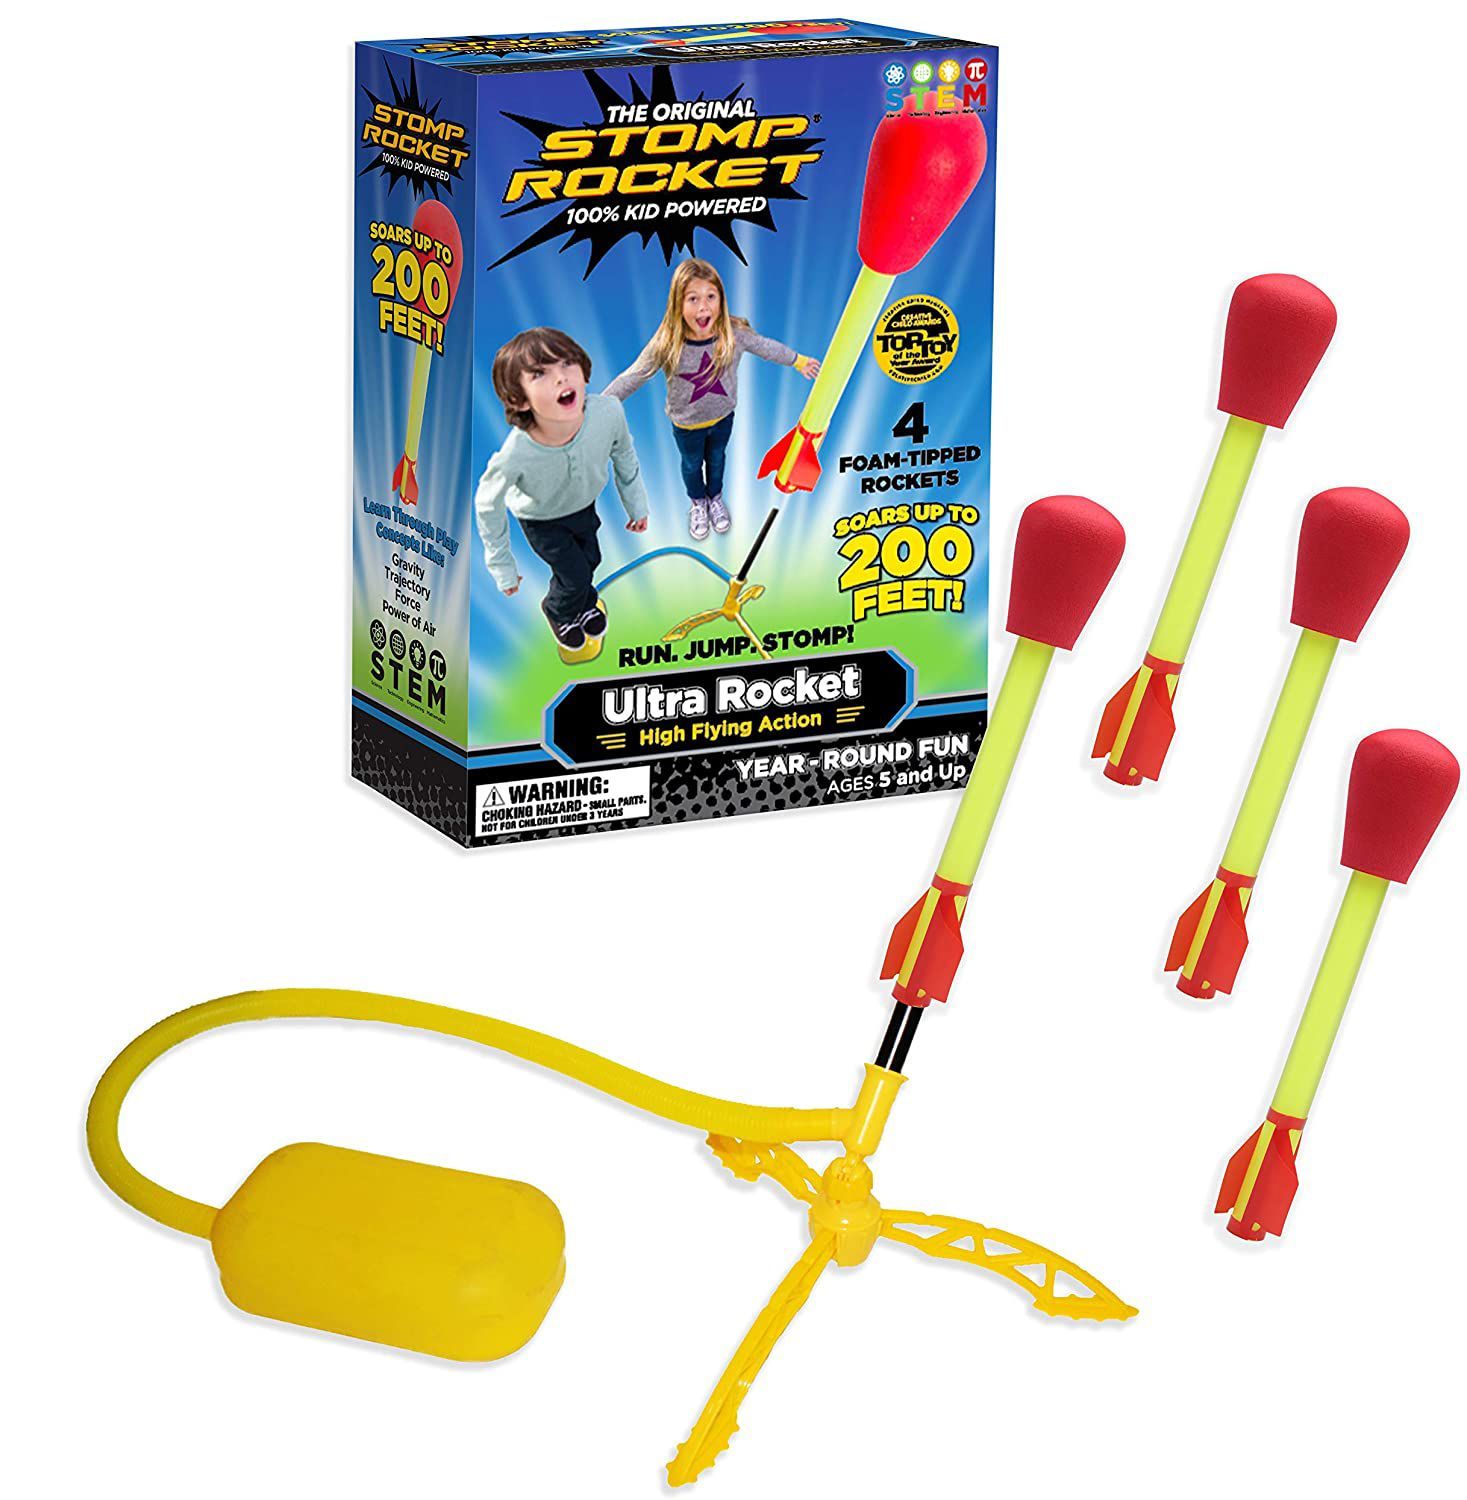 outdoor toys for autistic child